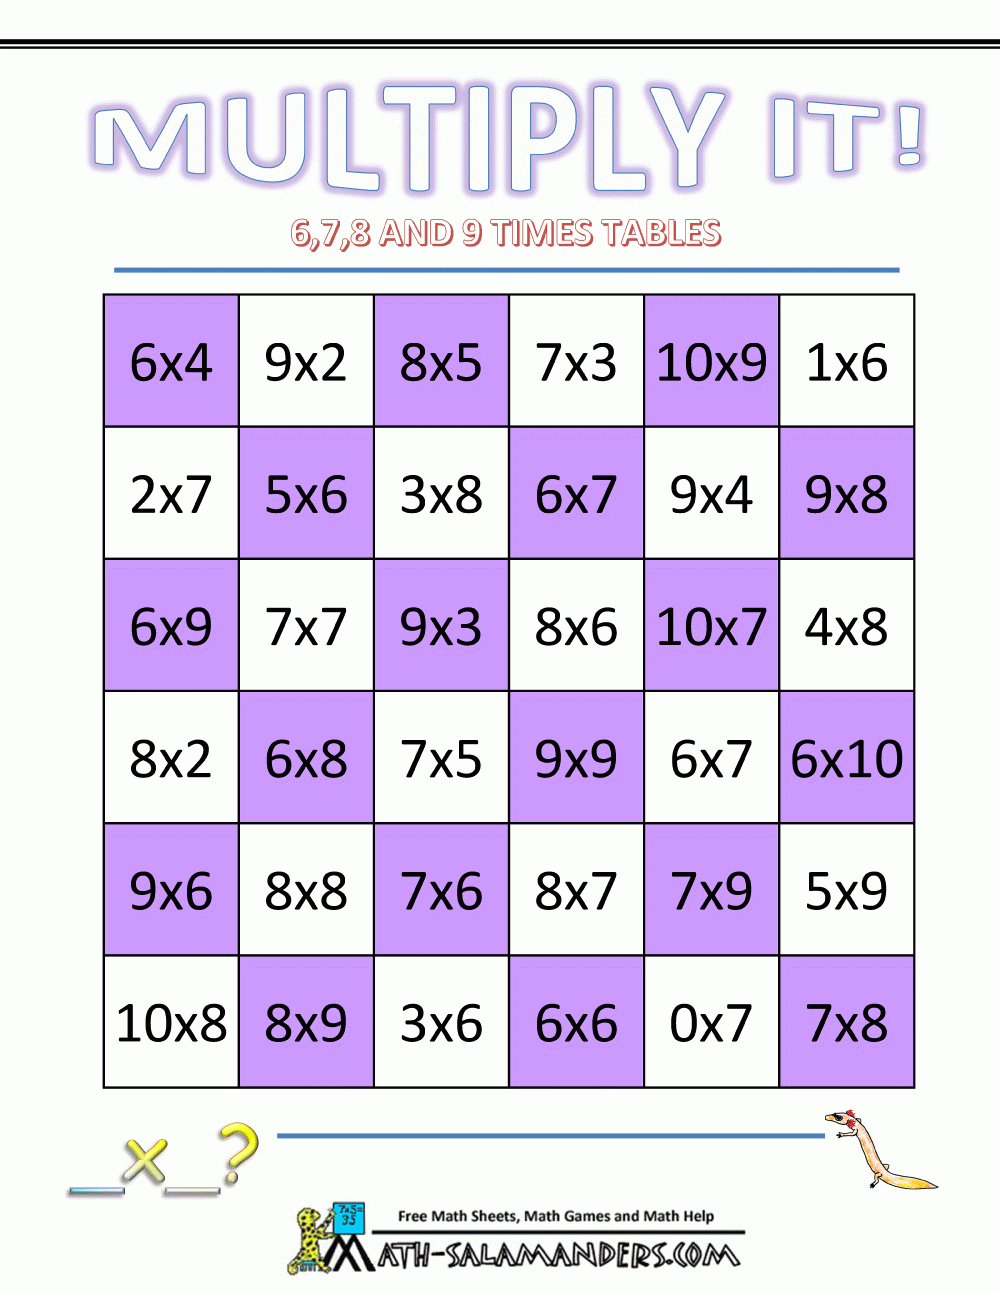 Multiplication Math Games in Printable Multiplication Fact Games